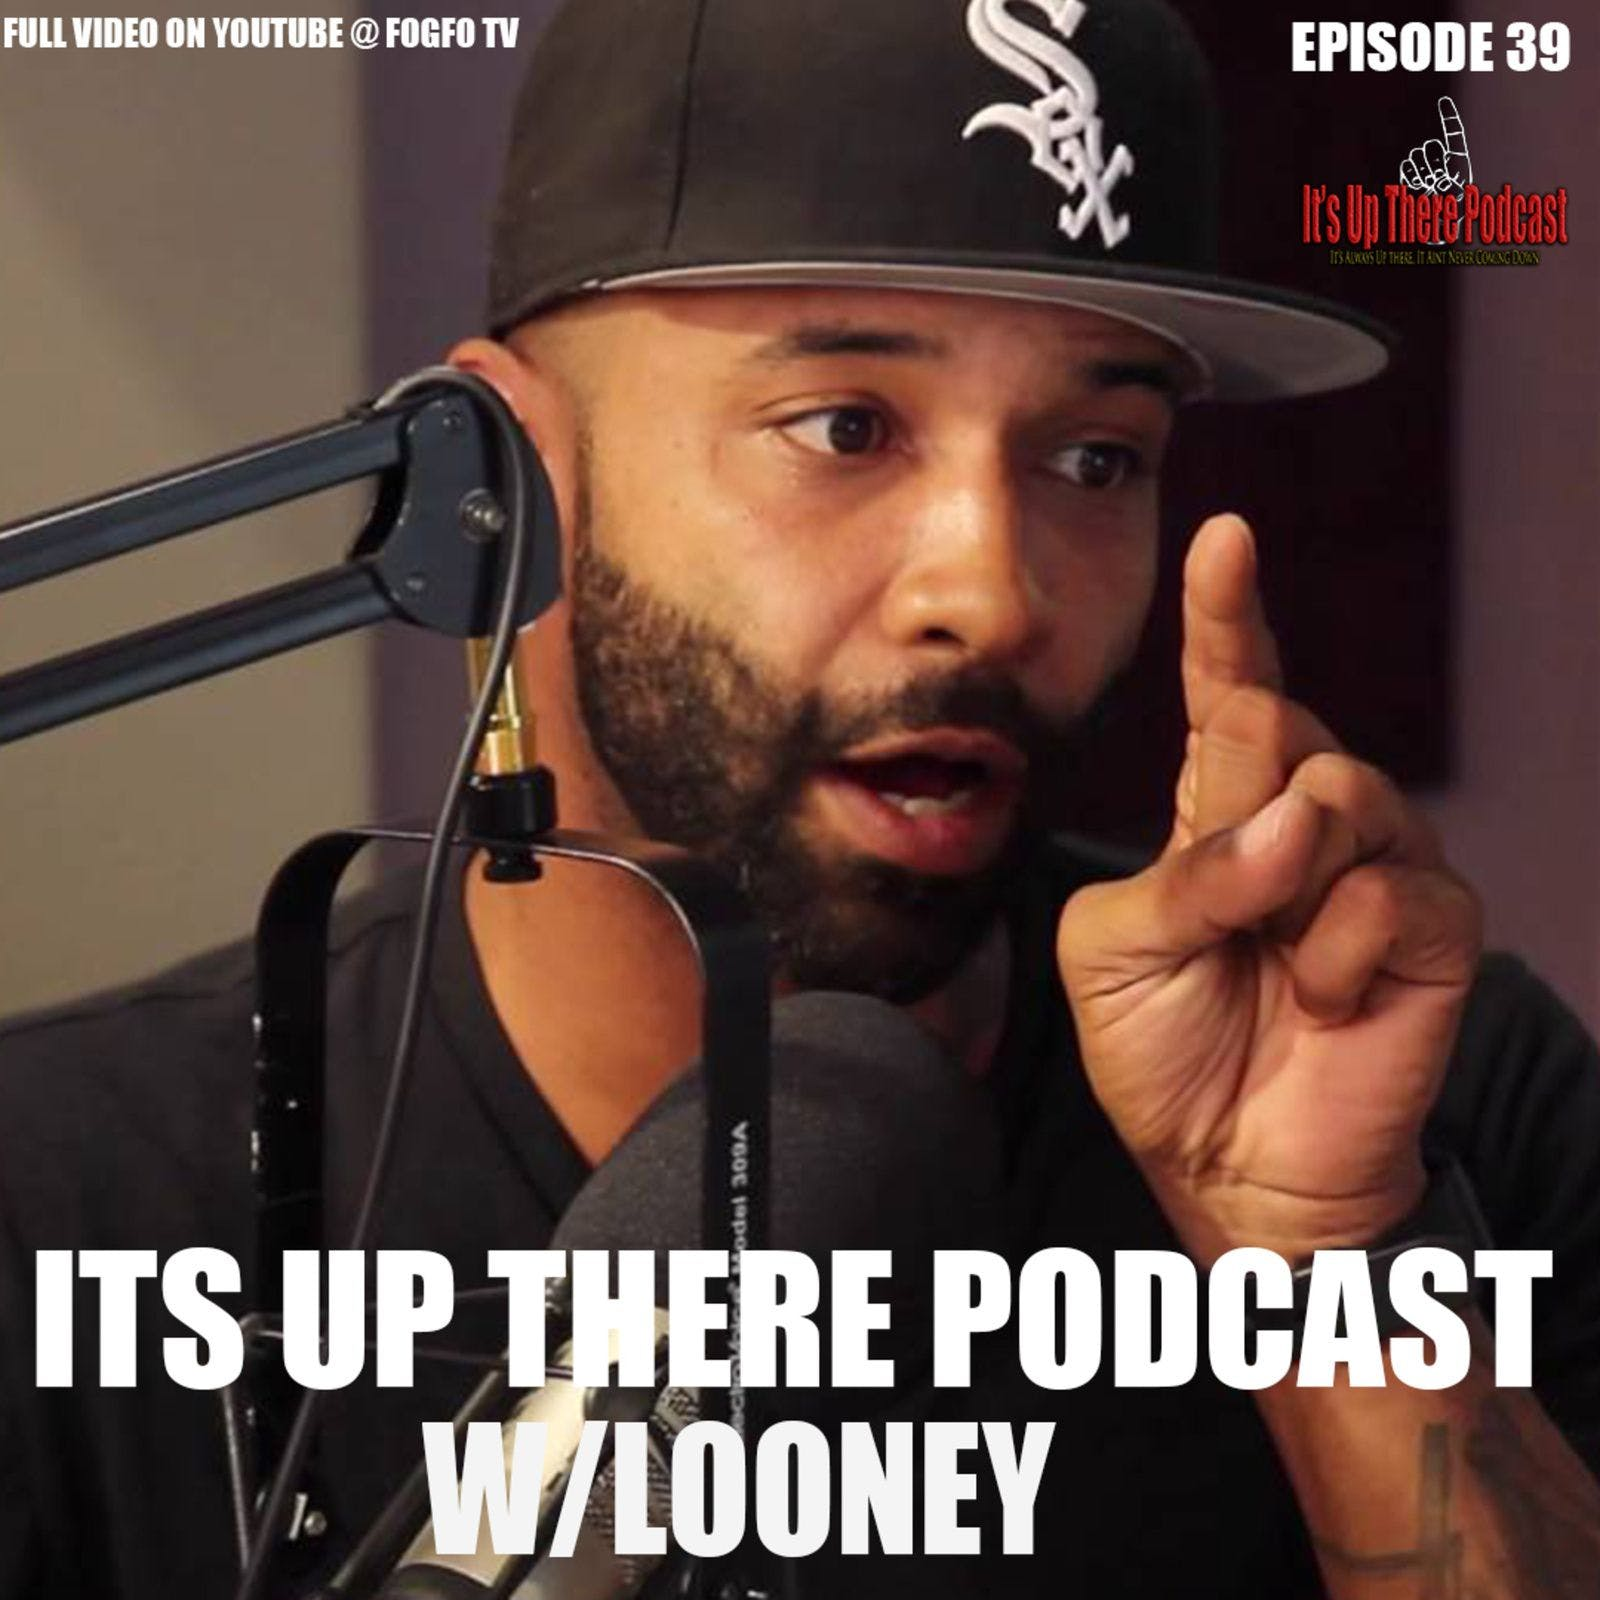 ITS UP THERE PODCAST EP 39 | JOE BUDDEN ROBCAST | IS IT THE END OF A DYNASTY ? WHAT ROLE DID DJ AKADEMIKS PLAY IN THE JOE BUDDEN PODCAST BREAKUP EXPLAINED